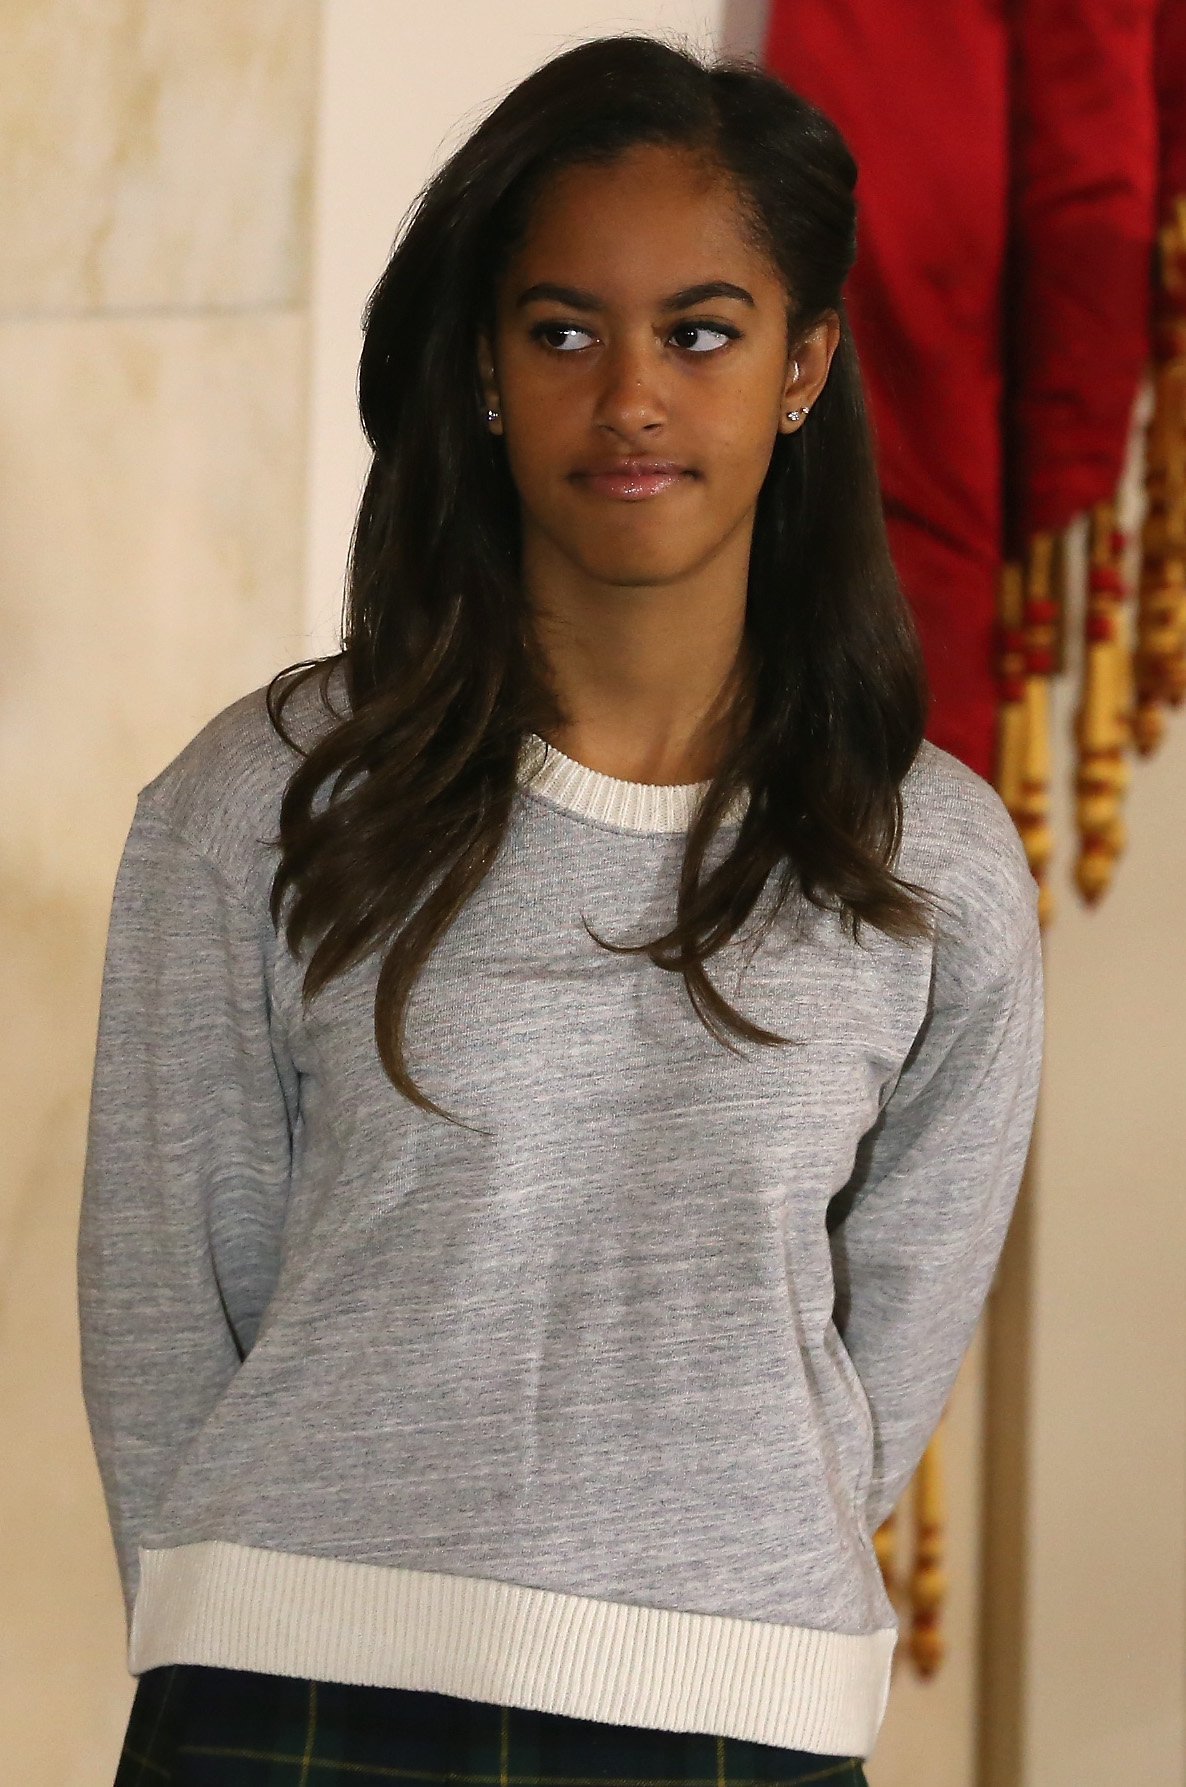 Malia Obama during a ceremony at the White House November 26, 2014 | Photo: GettyImages